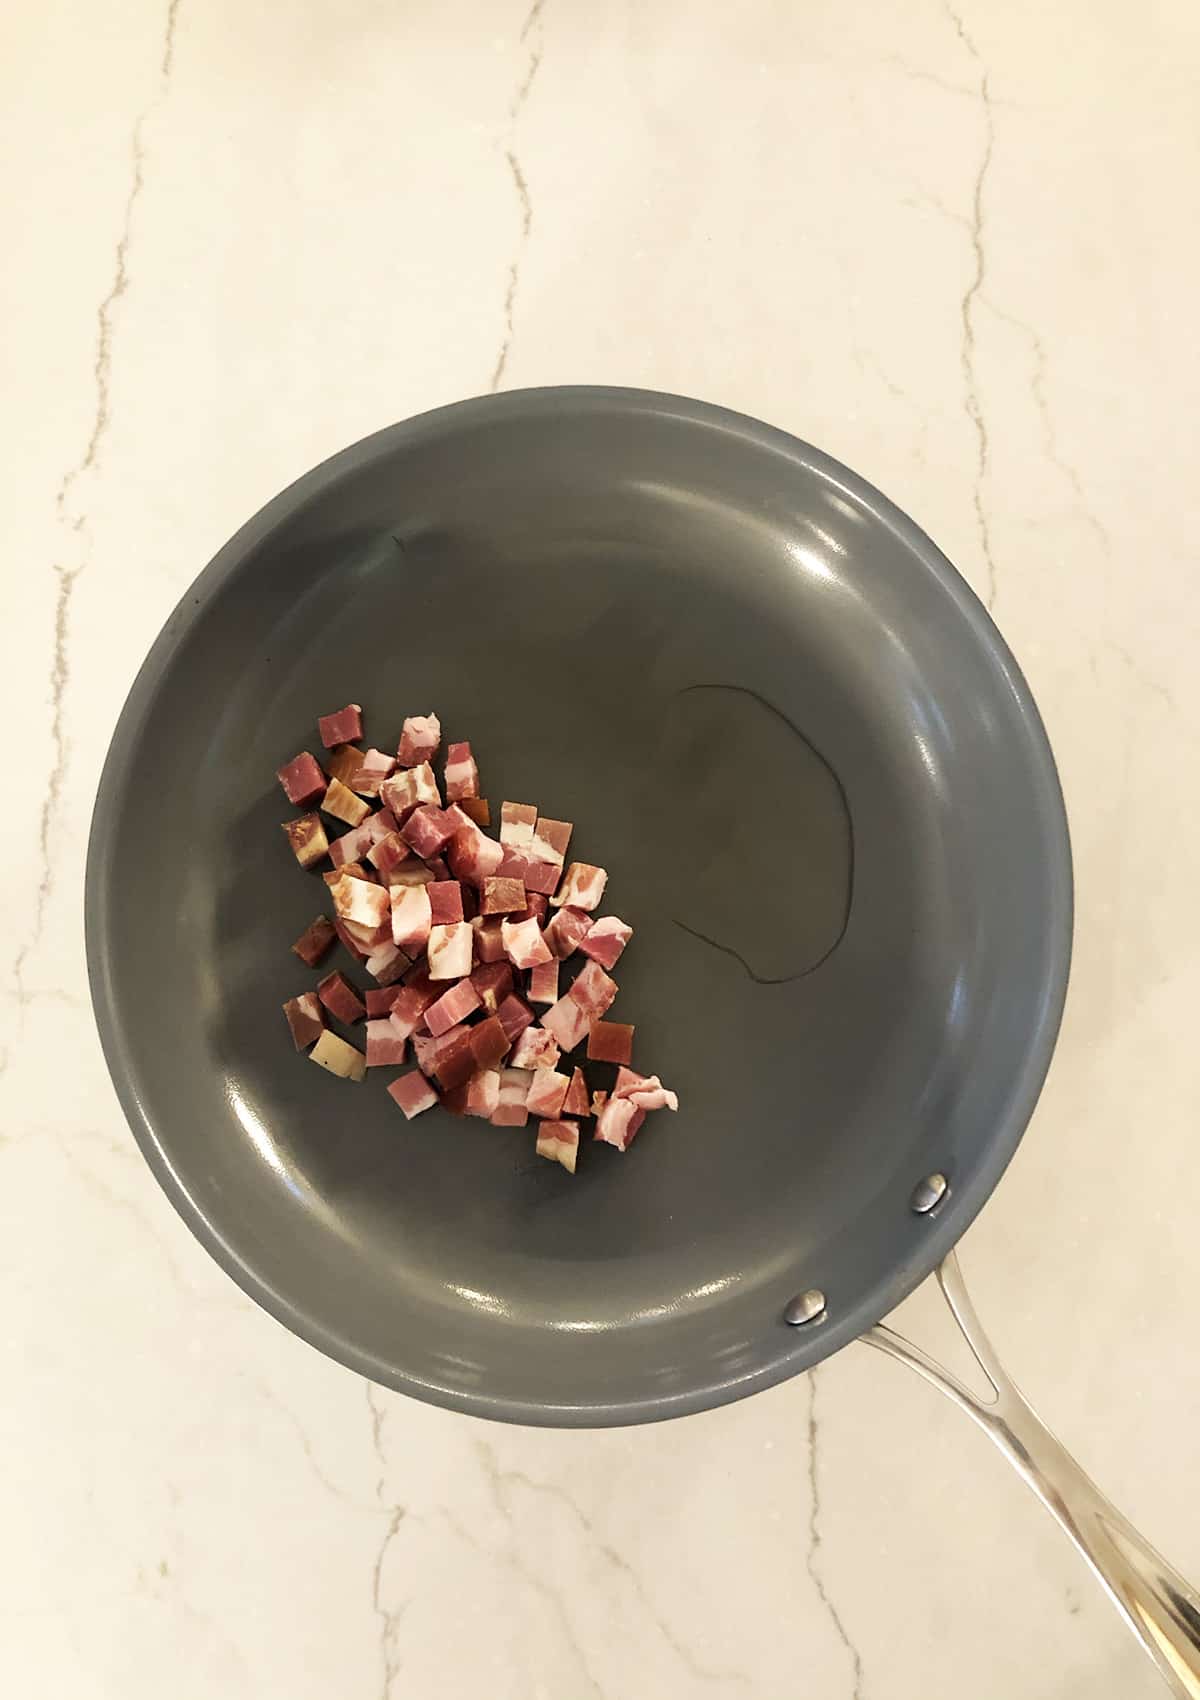 Pancetta cooking on a grey frying pan. 